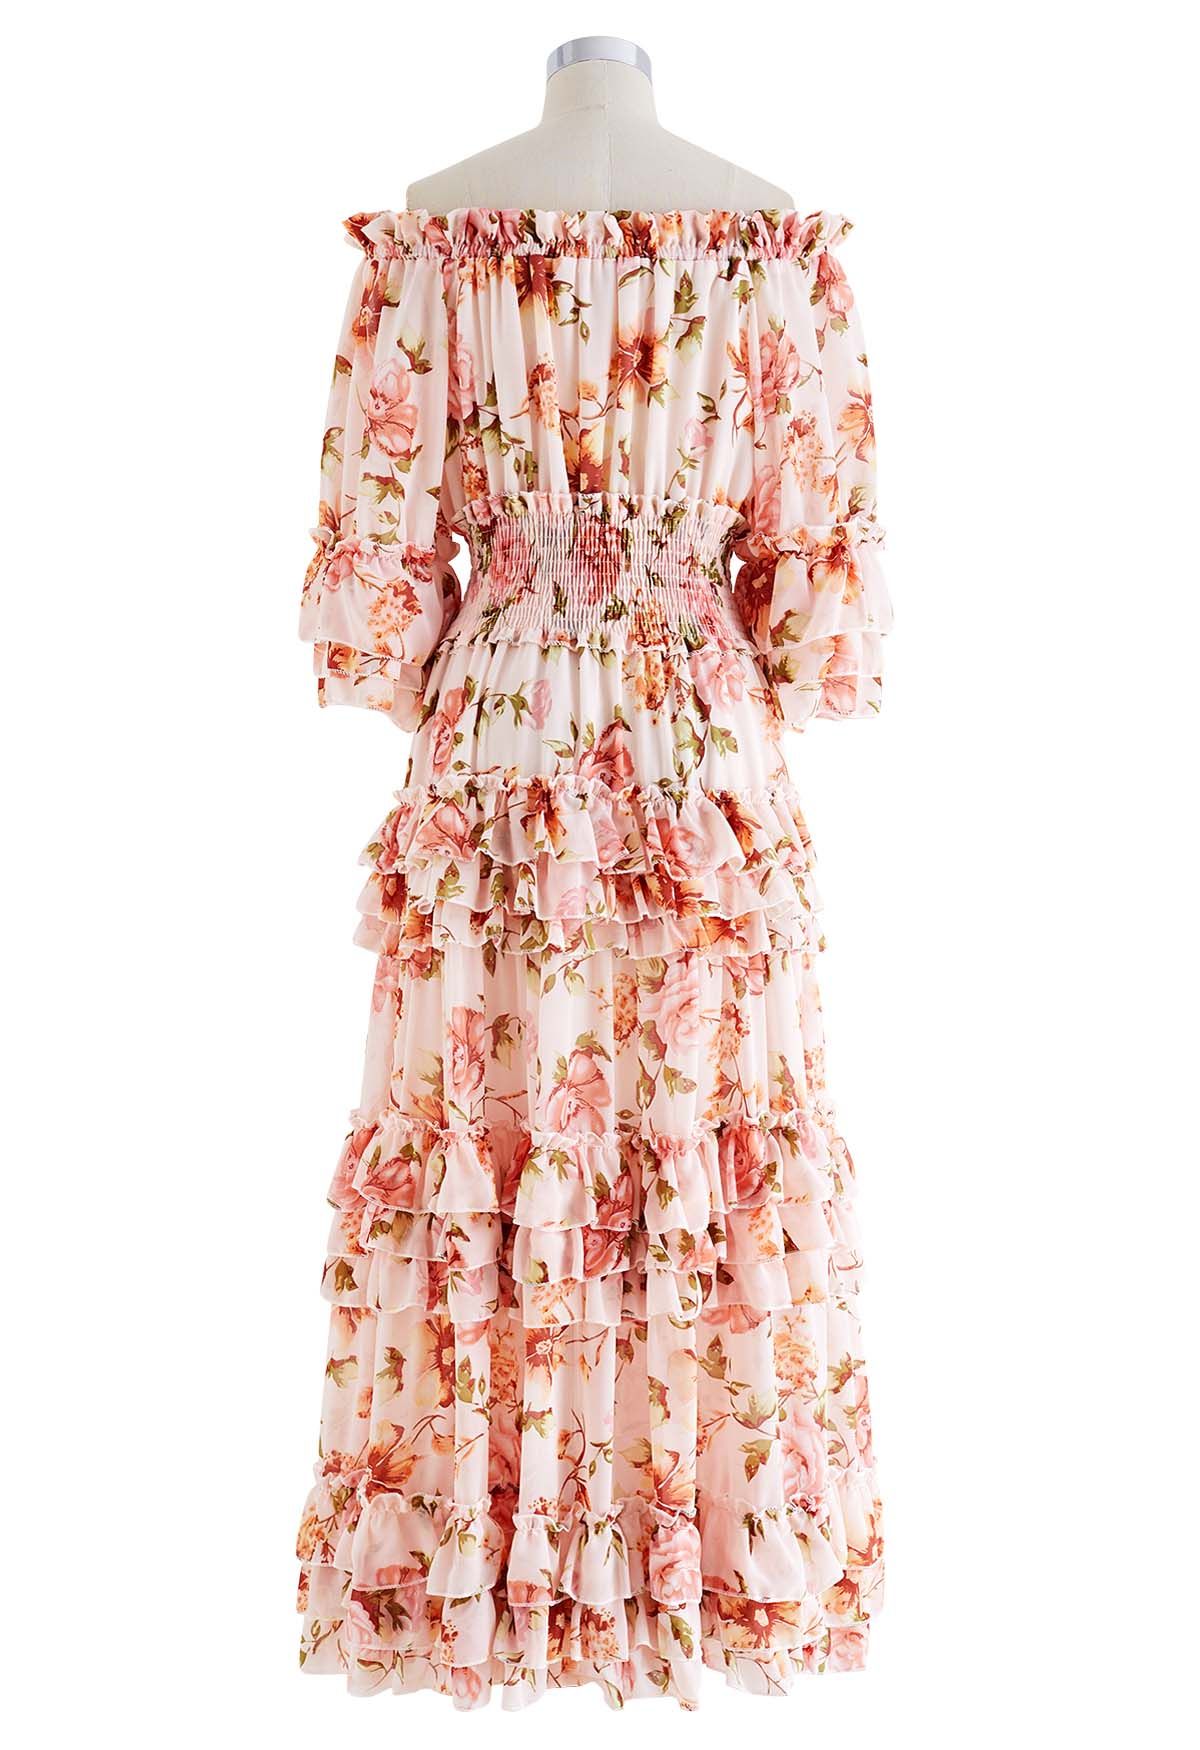 Tiered Ruffle Floral Off-Shoulder Chiffon Maxi Dress in Blush